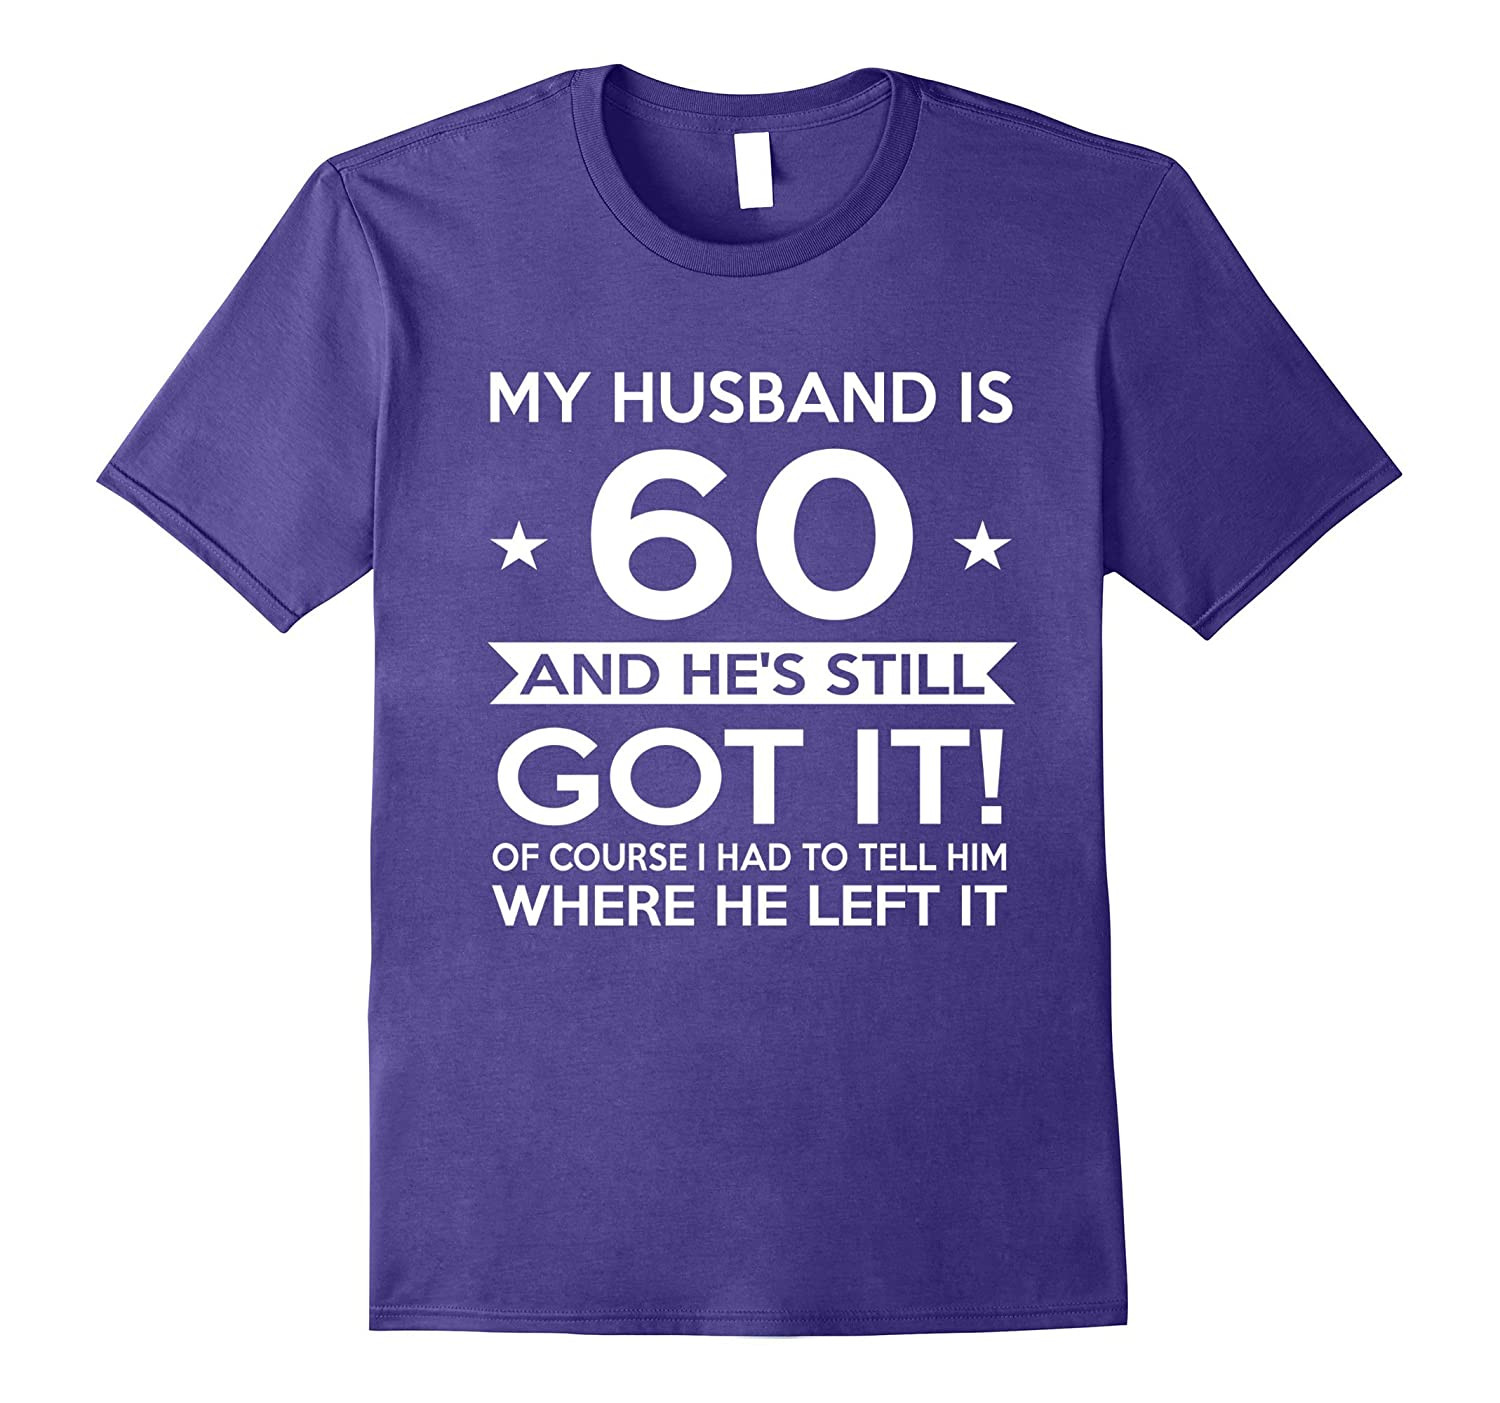 Husband Birthday Gift
 My Husband is 60 60th Birthday Gift Ideas for him CL